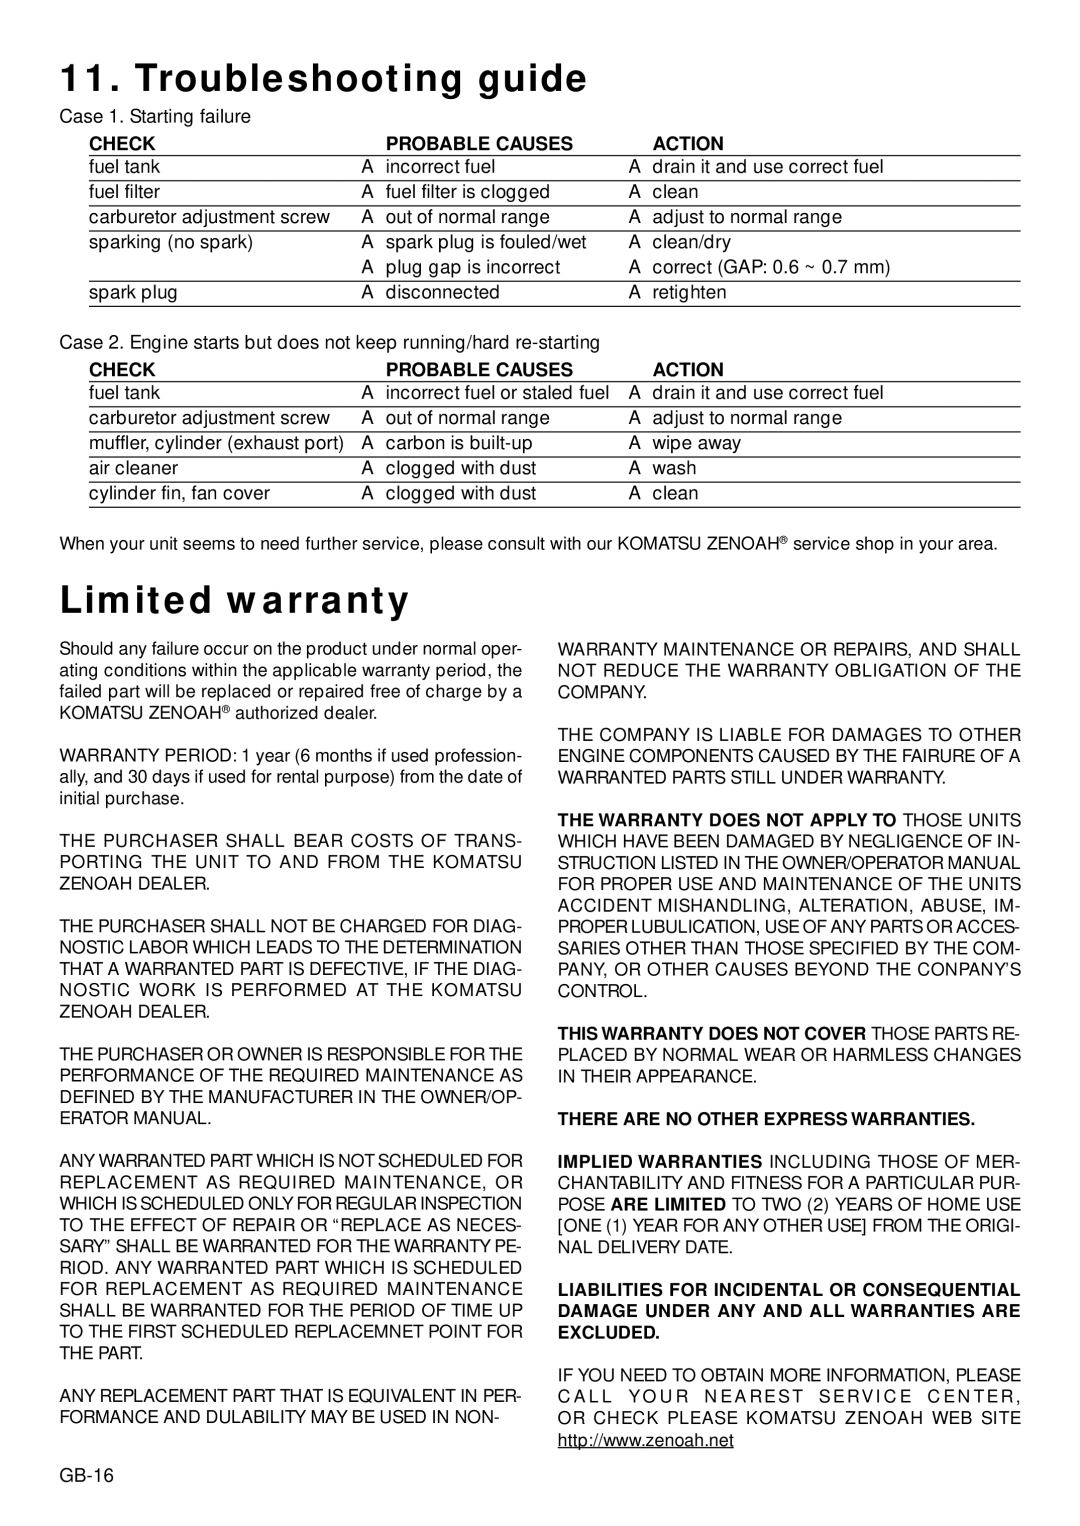 Zenoah TR2001, BC2002 owner manual Troubleshooting guide, Limited warranty, Check Probable Causes Action 